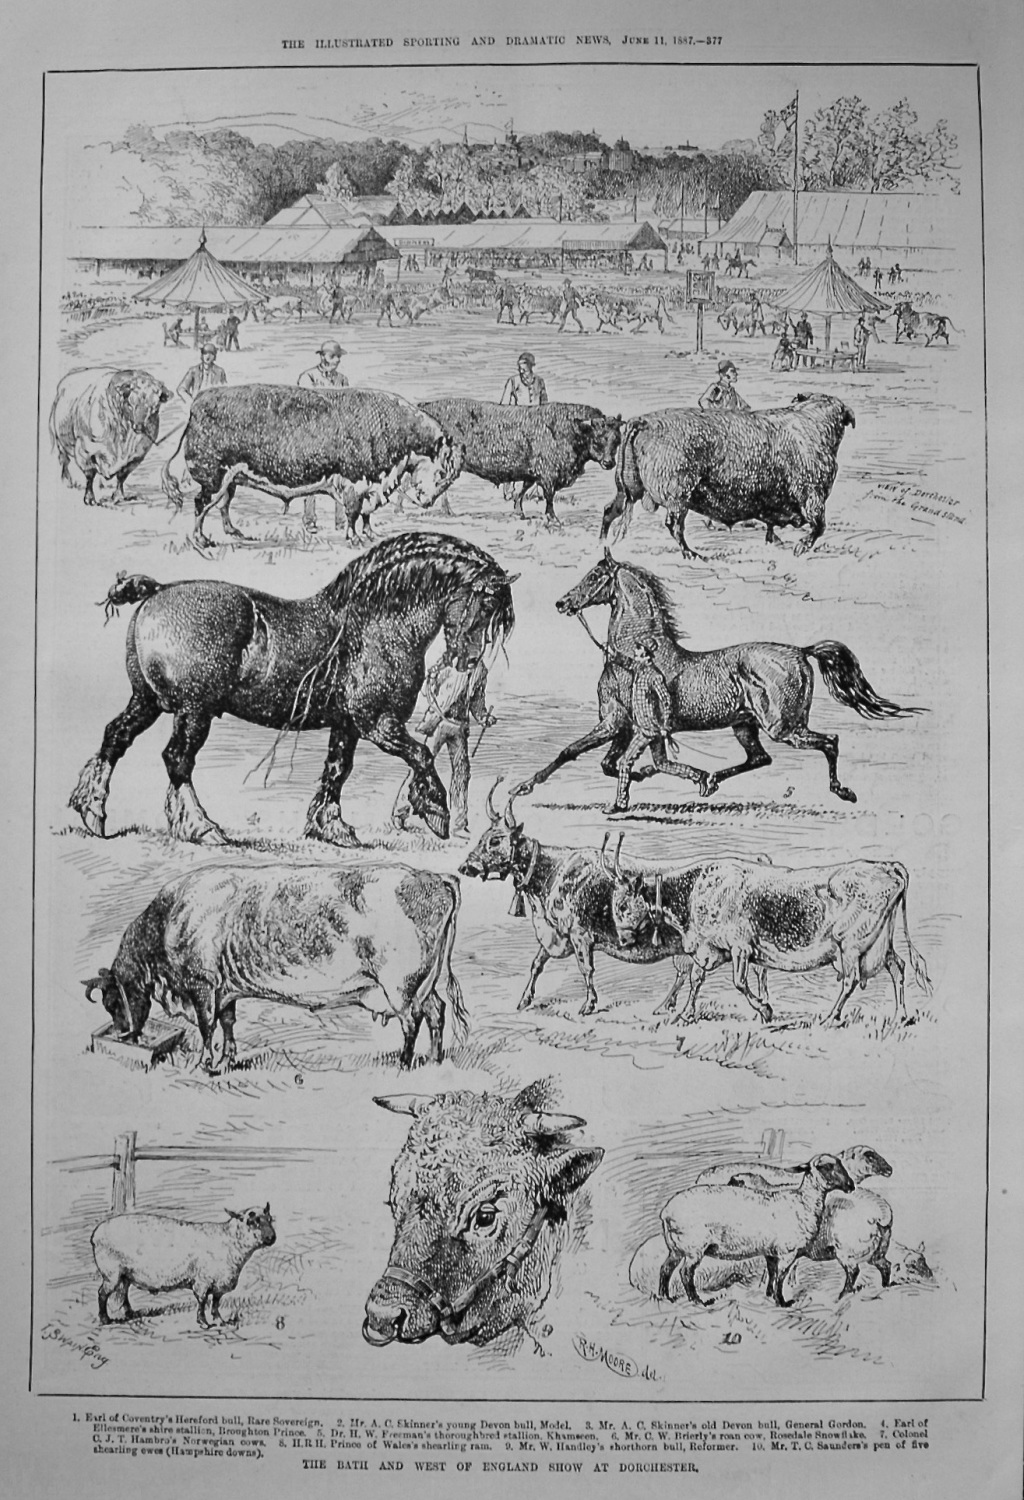 The Bath and West of England Show at Dorchester. 1887